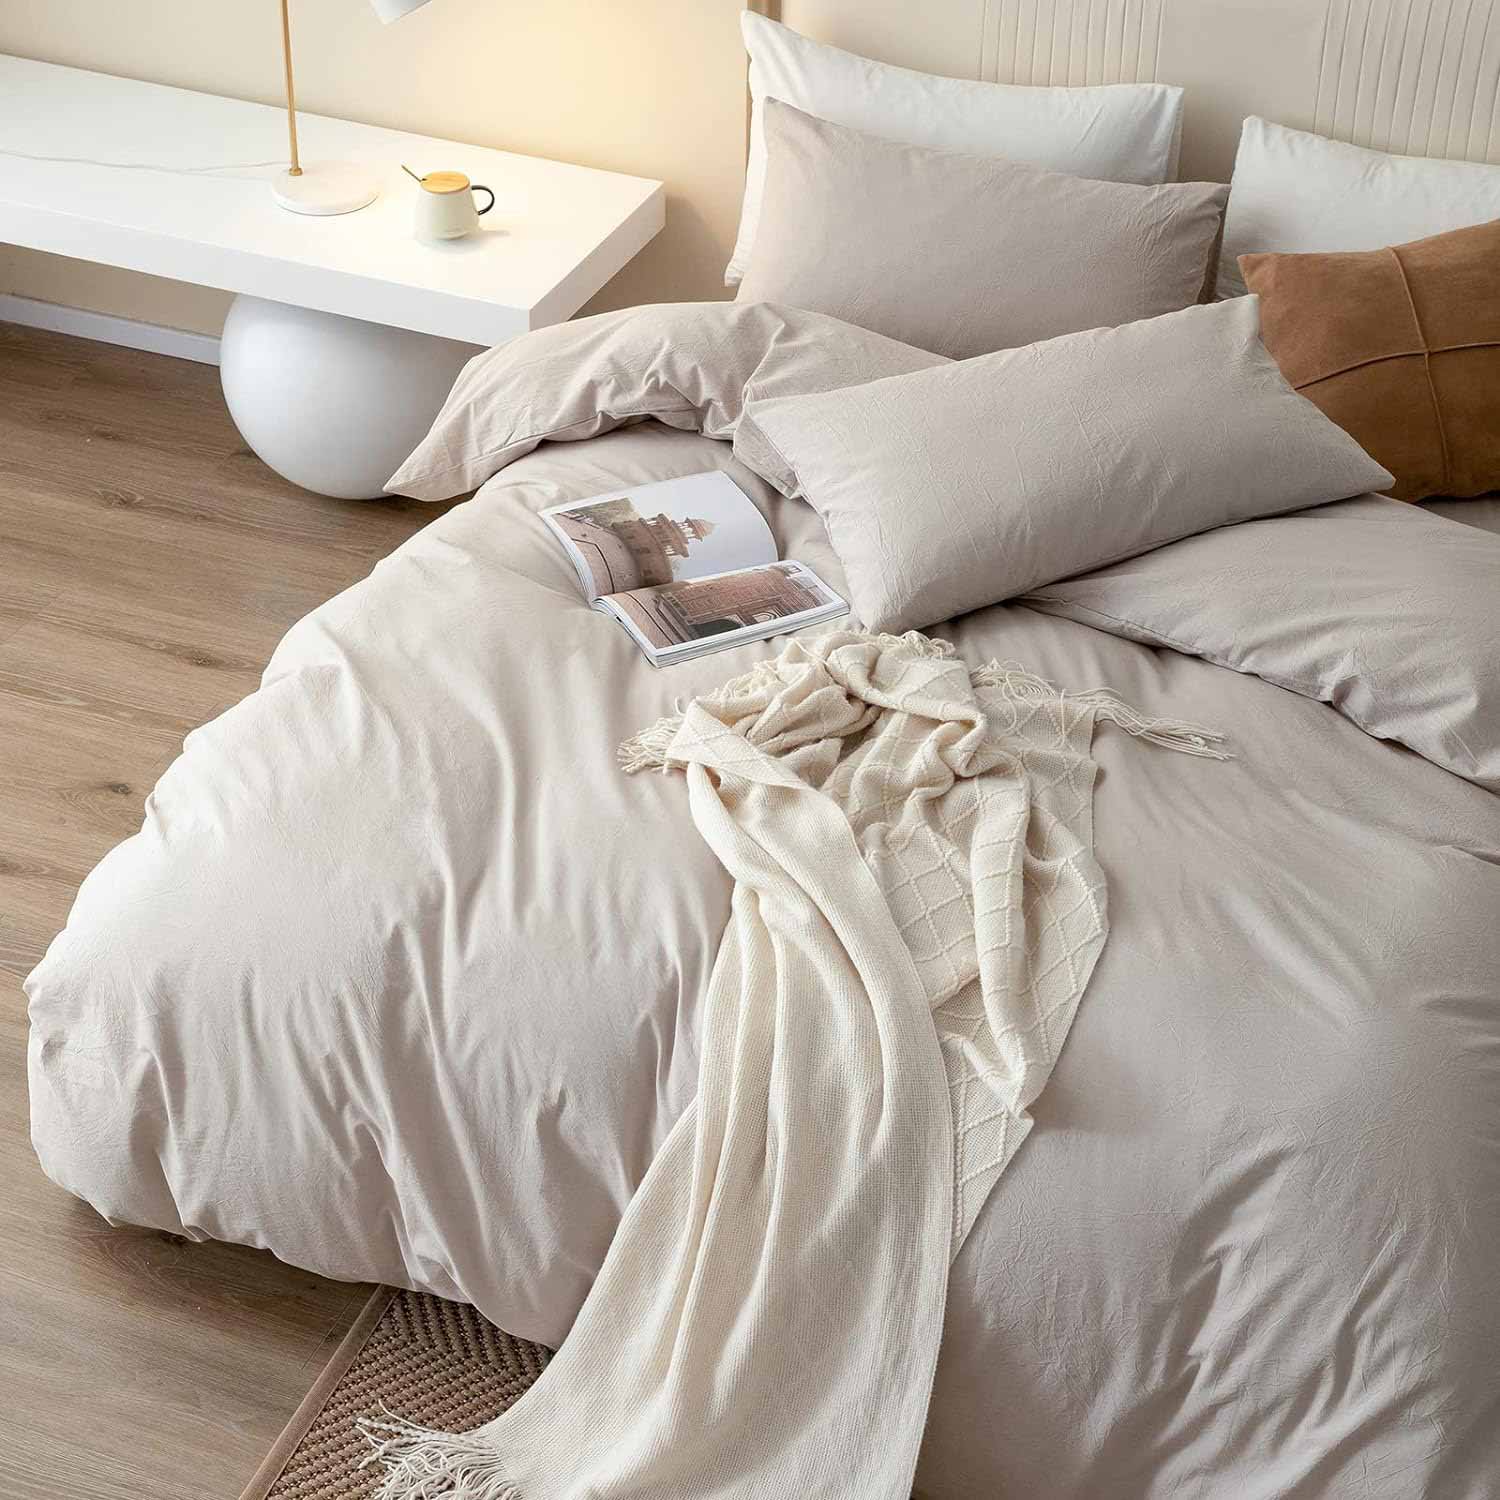 Bed with soft beige bedding